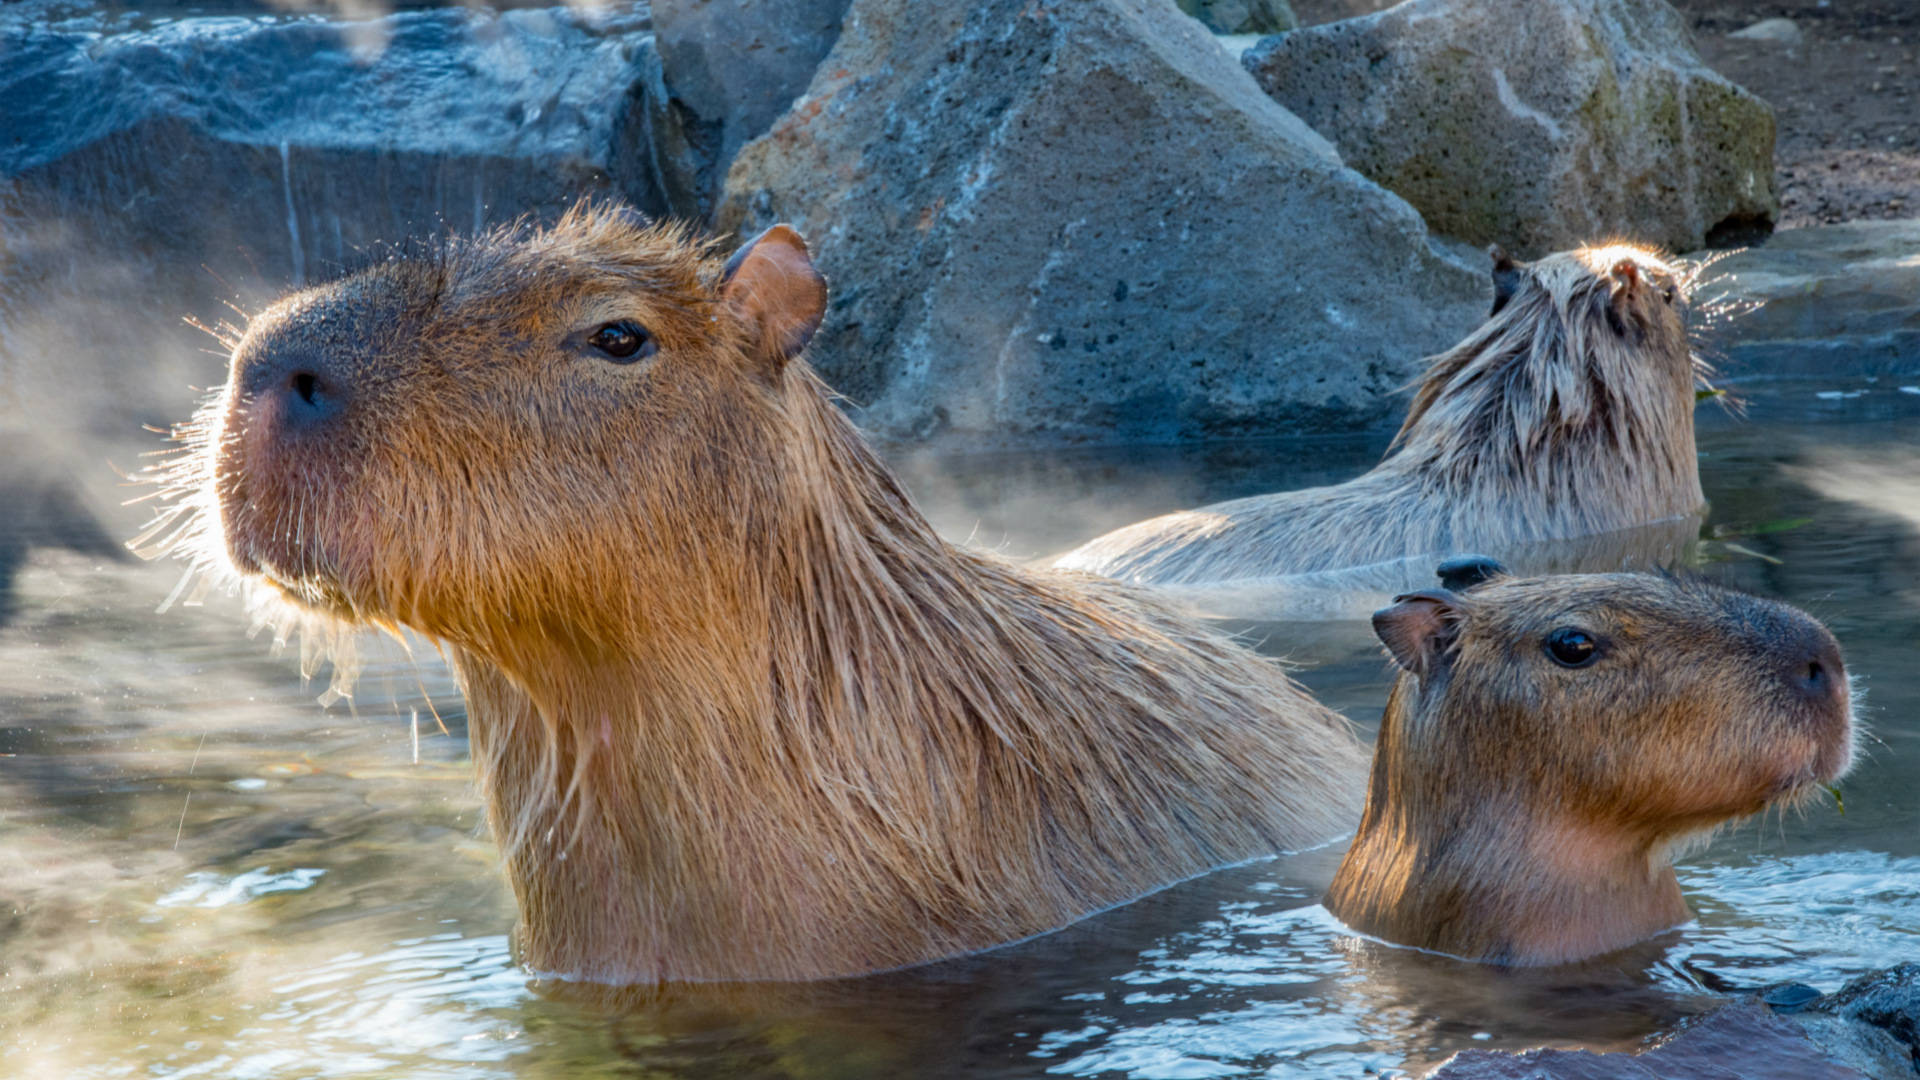 Soaked Capybara In The Water Wallpaper